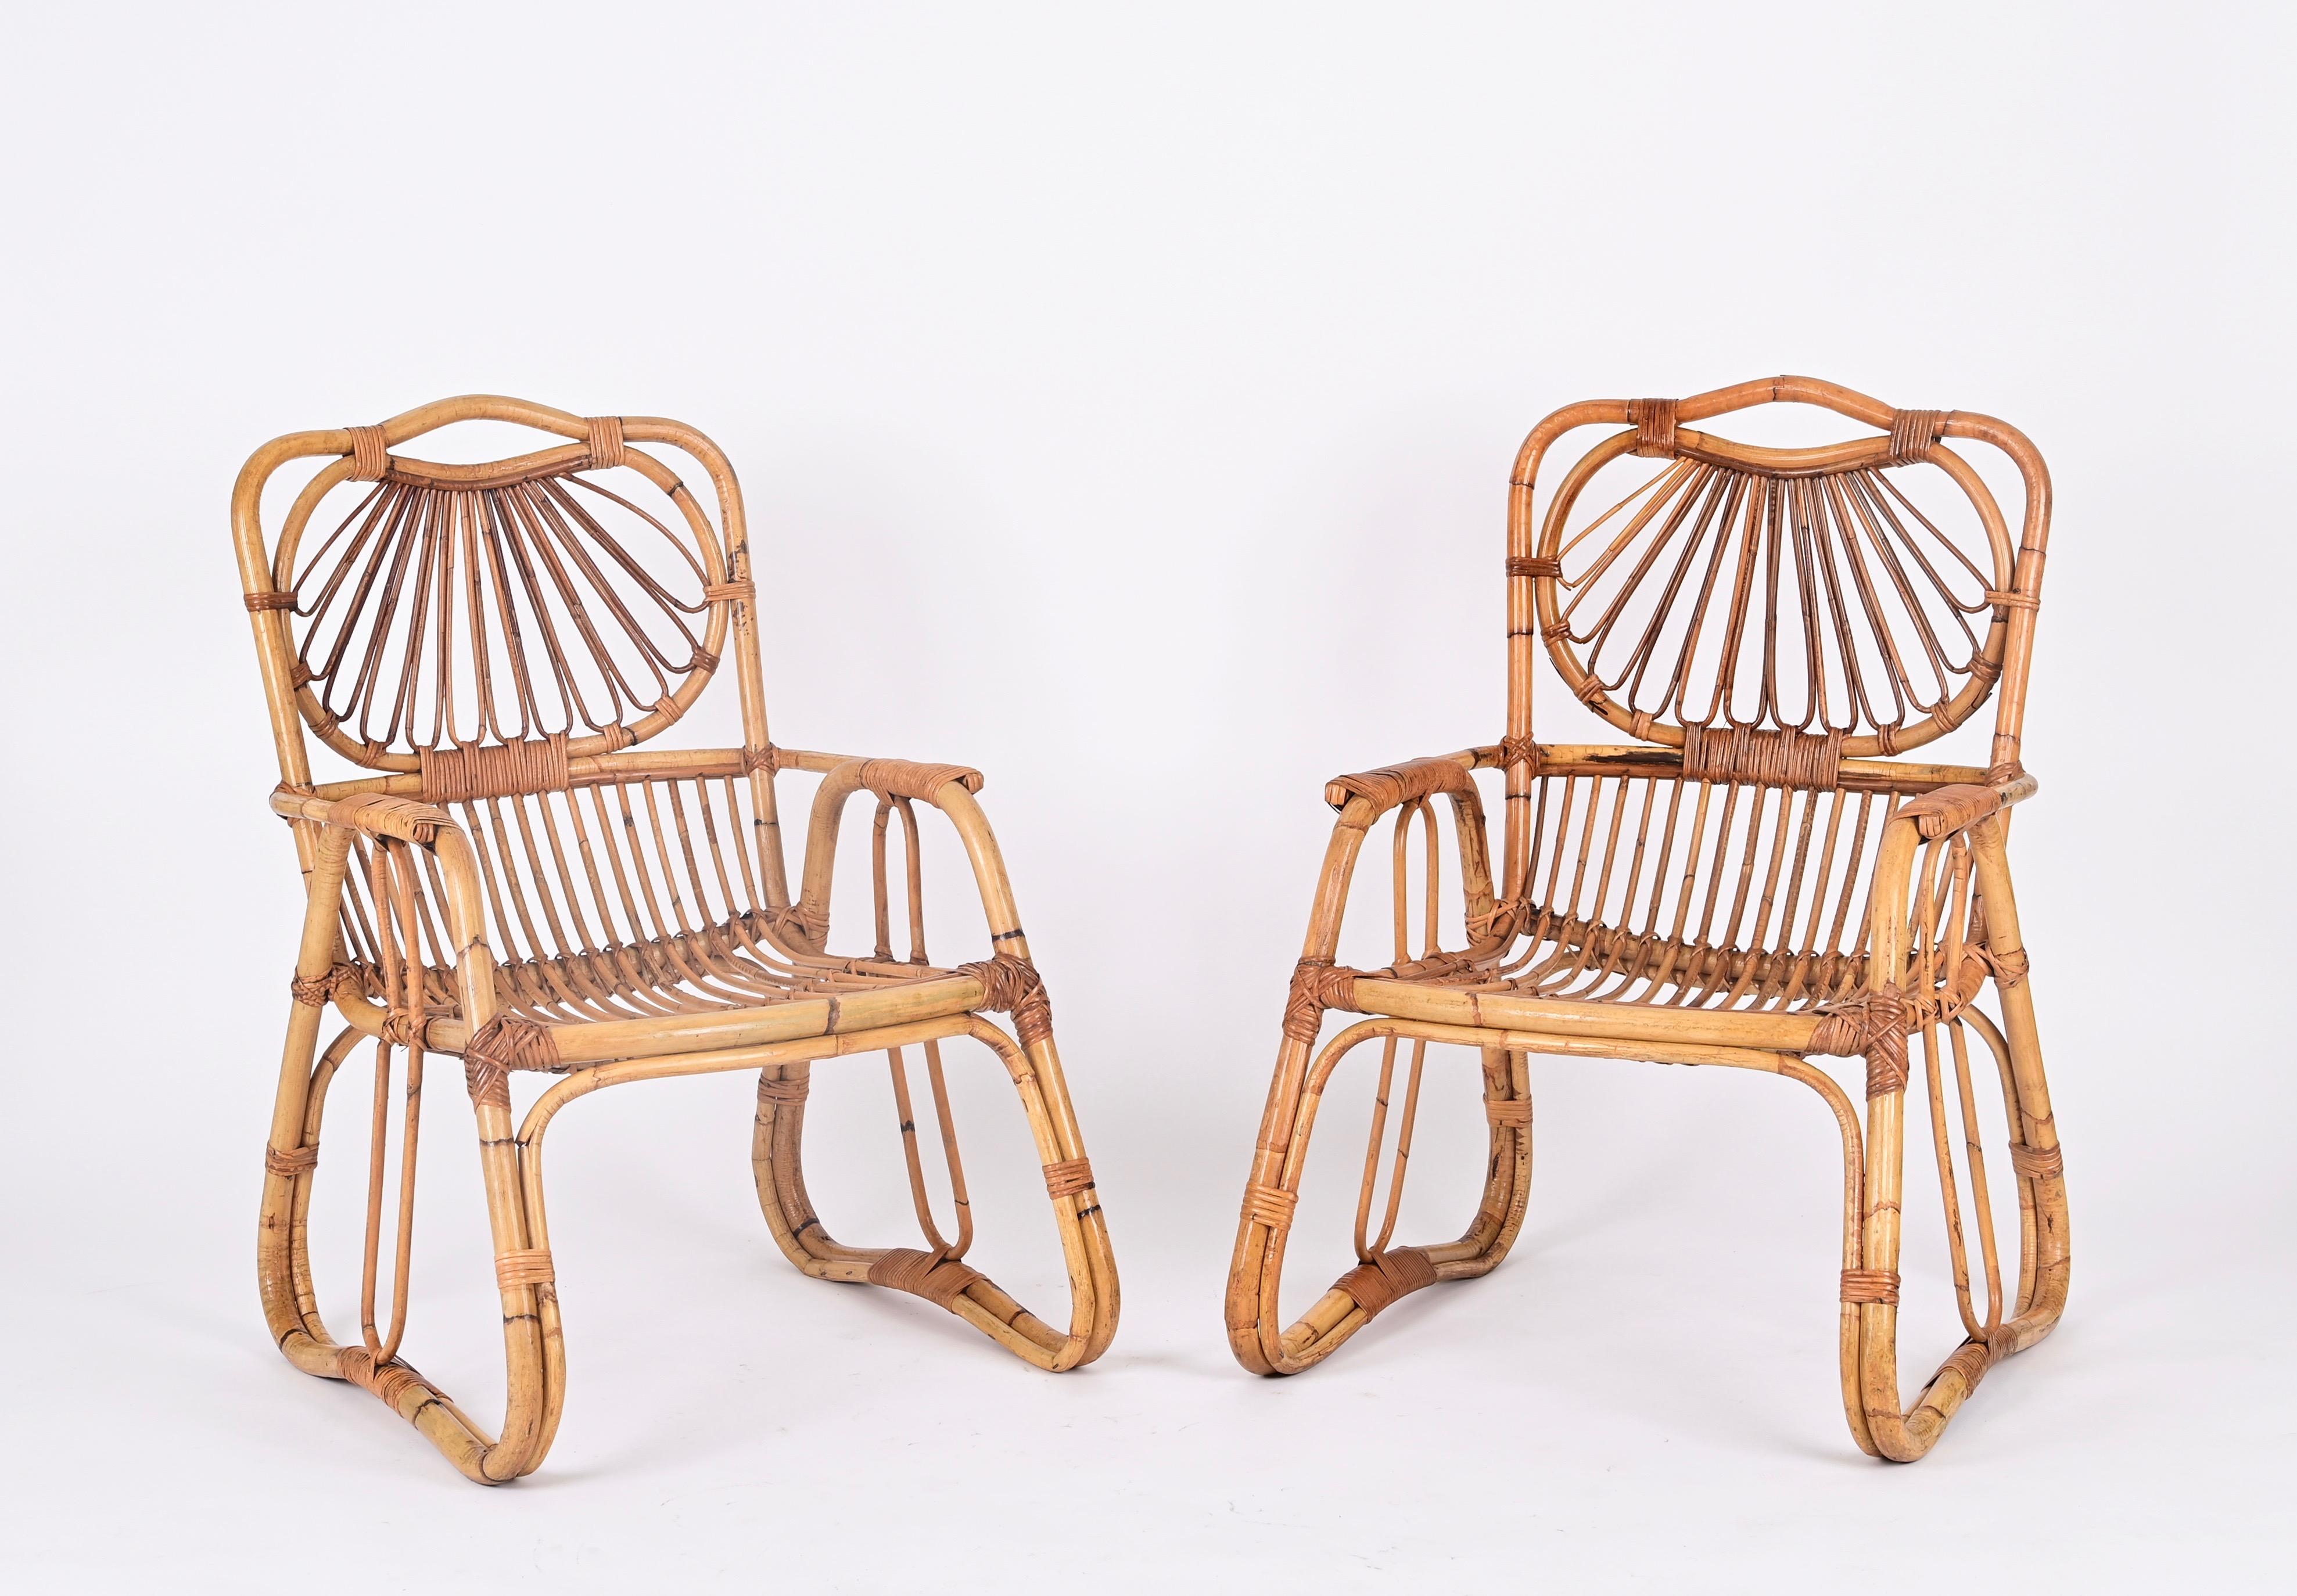 Pair of Giovanni Travasa Bamboo, Rattan and Wicker Italian Armchairs, 1960s For Sale 4